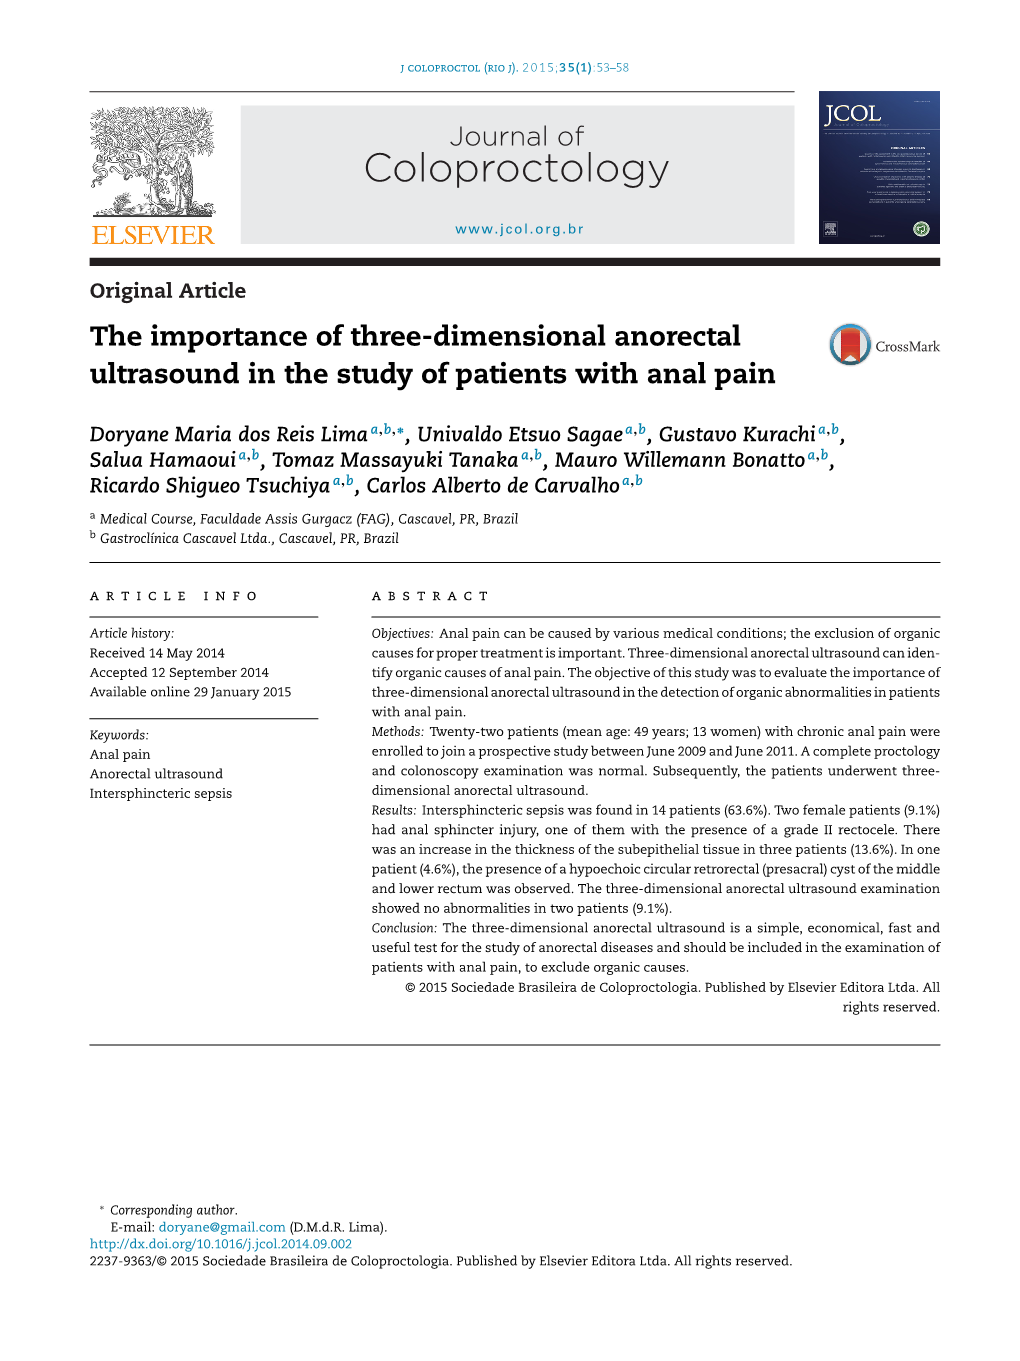 The Importance of Three-Dimensional Anorectal Ultrasound in the Study Of